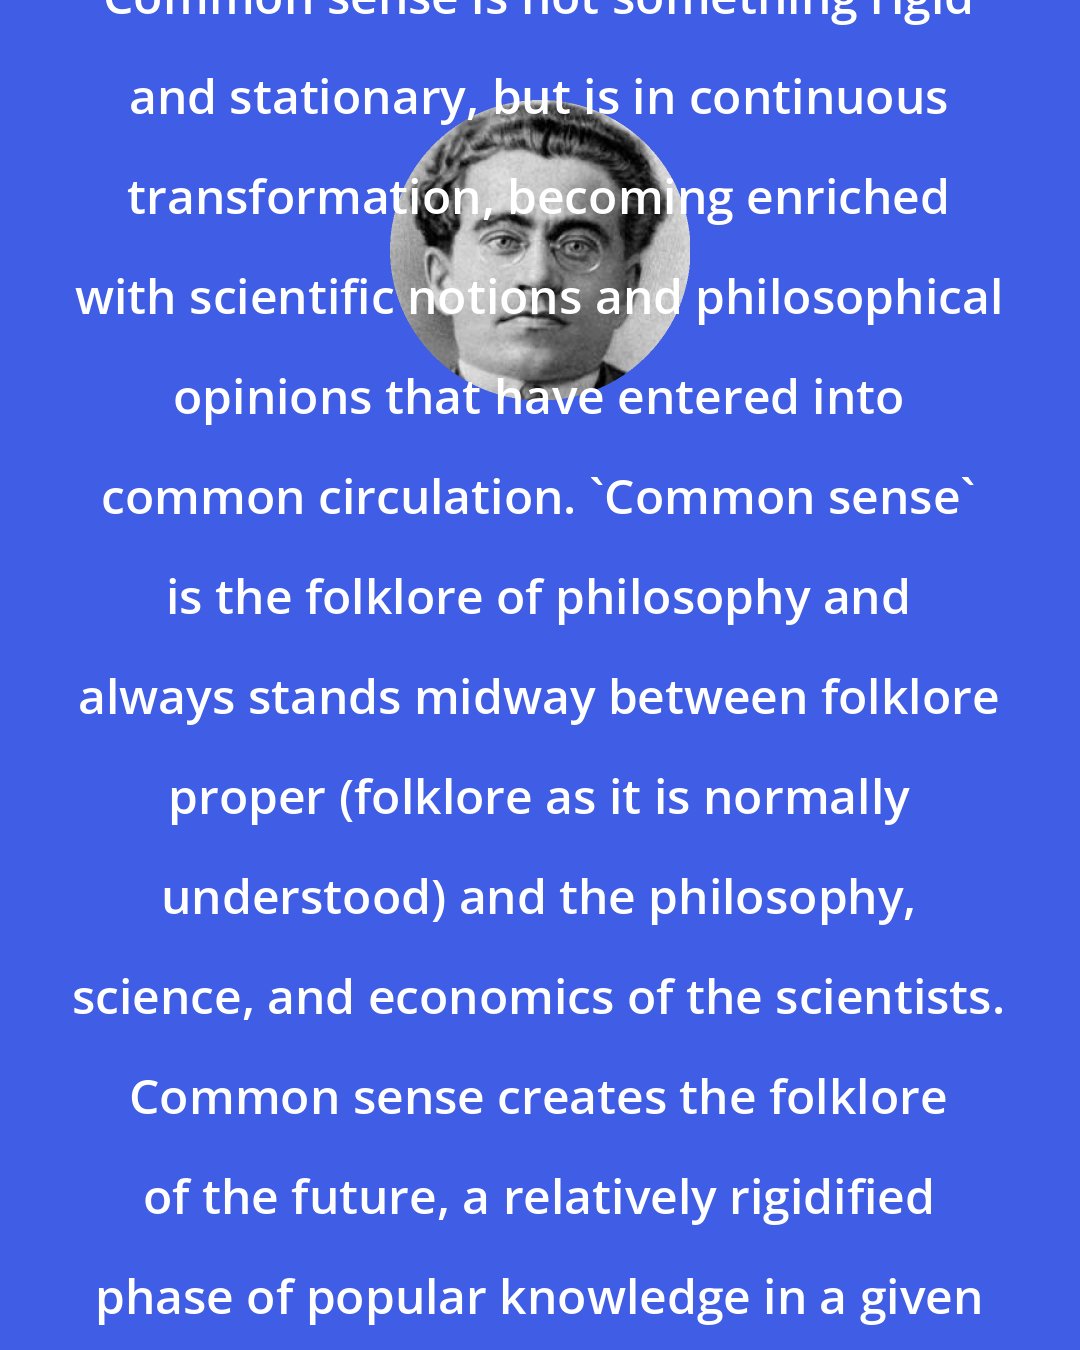 Antonio Gramsci: Common sense is not something rigid and stationary, but is in continuous transformation, becoming enriched with scientific notions and philosophical opinions that have entered into common circulation. 'Common sense' is the folklore of philosophy and always stands midway between folklore proper (folklore as it is normally understood) and the philosophy, science, and economics of the scientists. Common sense creates the folklore of the future, a relatively rigidified phase of popular knowledge in a given time and place.